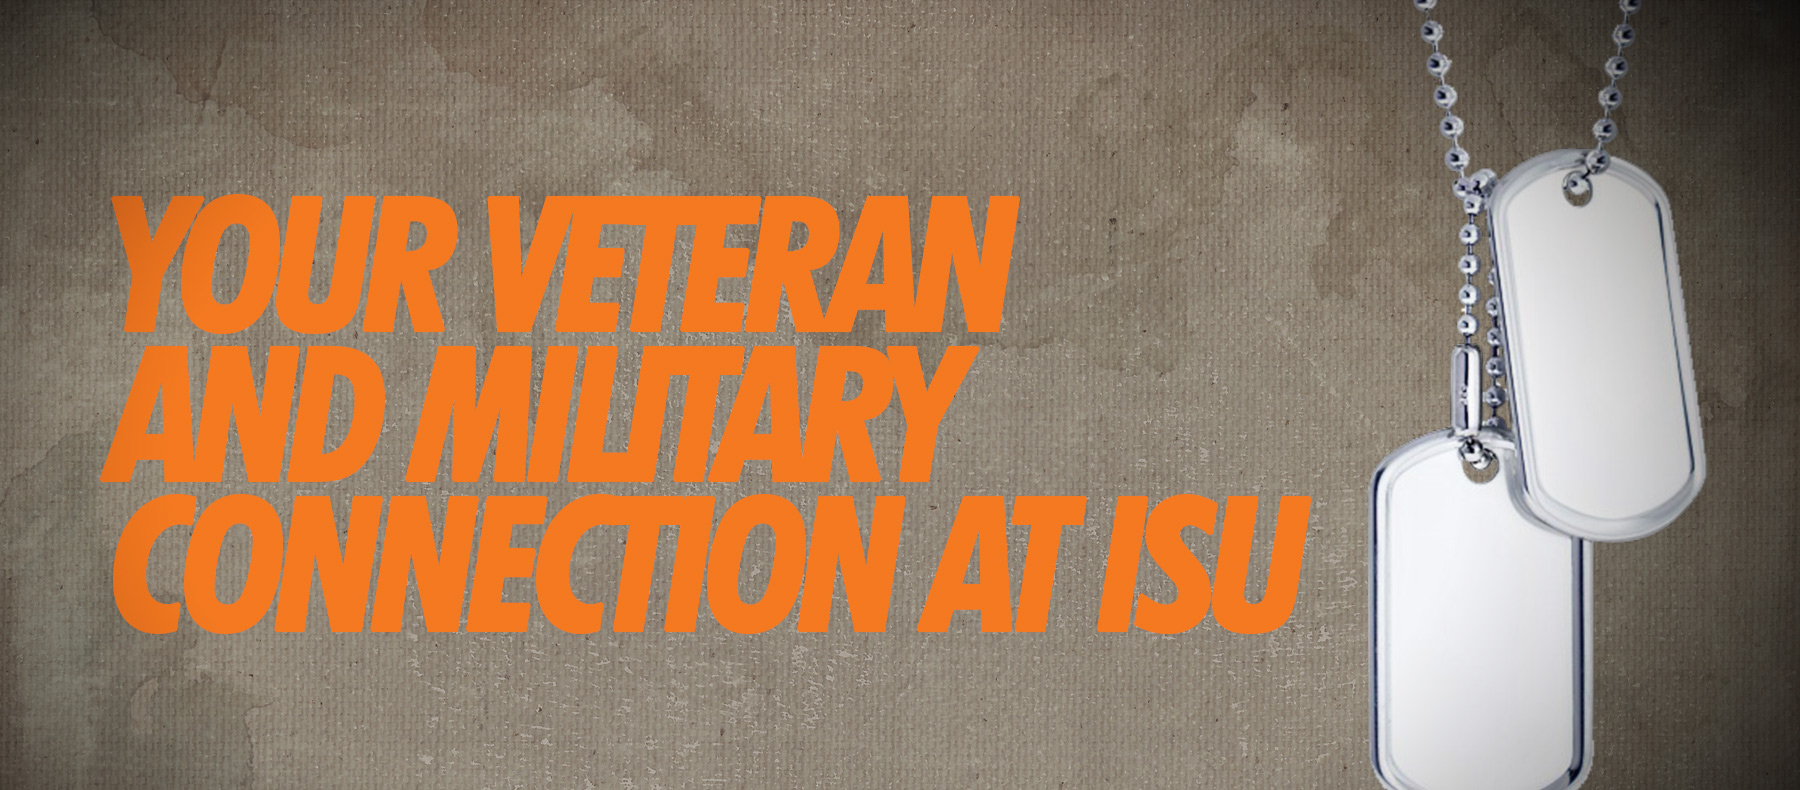 Your Veteran and Military Connection at ISU